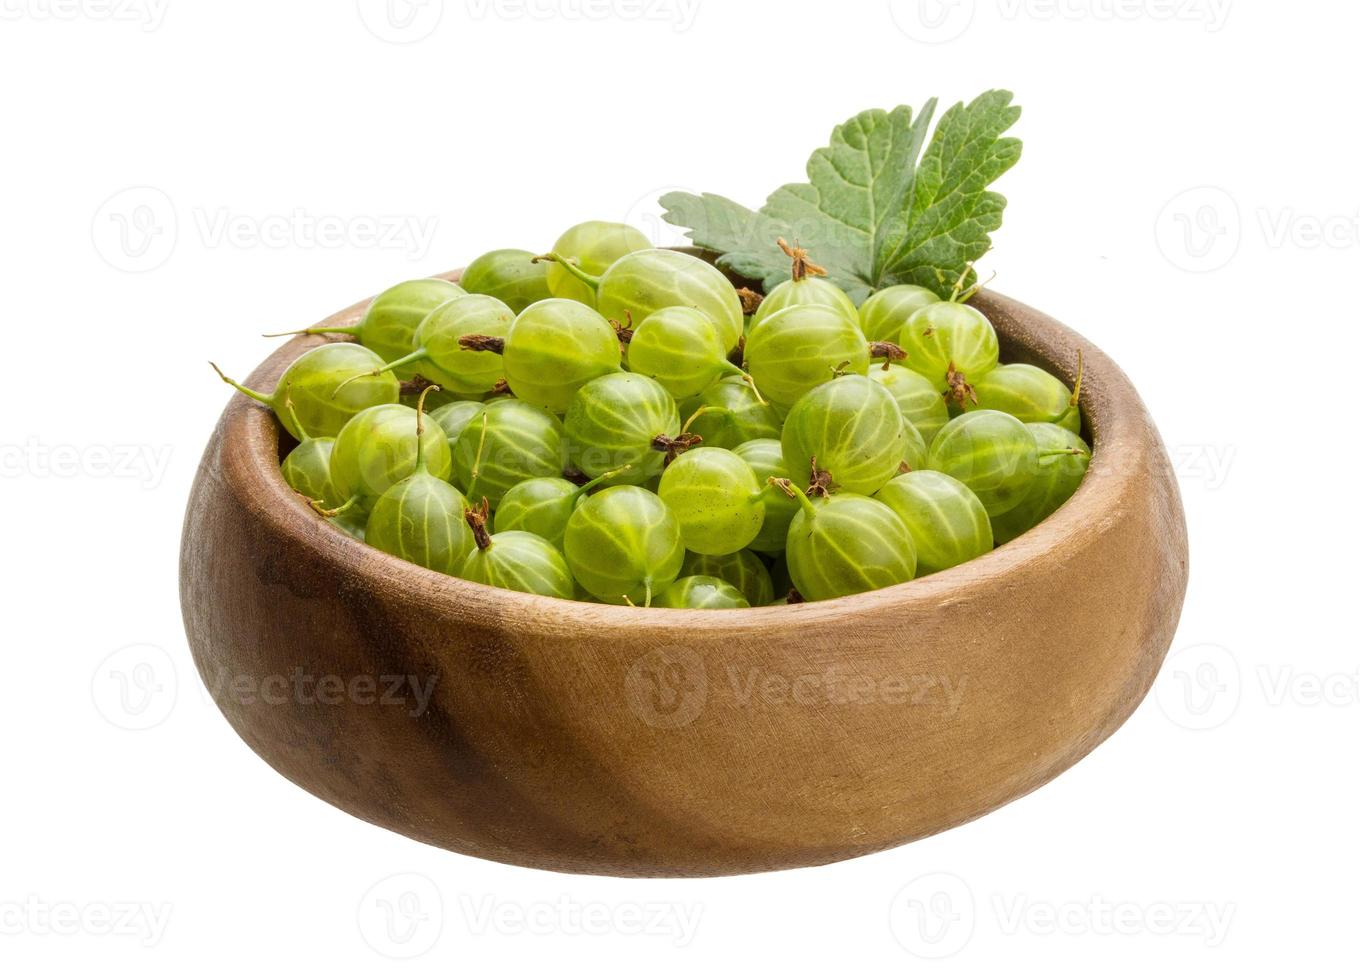 Gooseberry in a bowl on white background photo